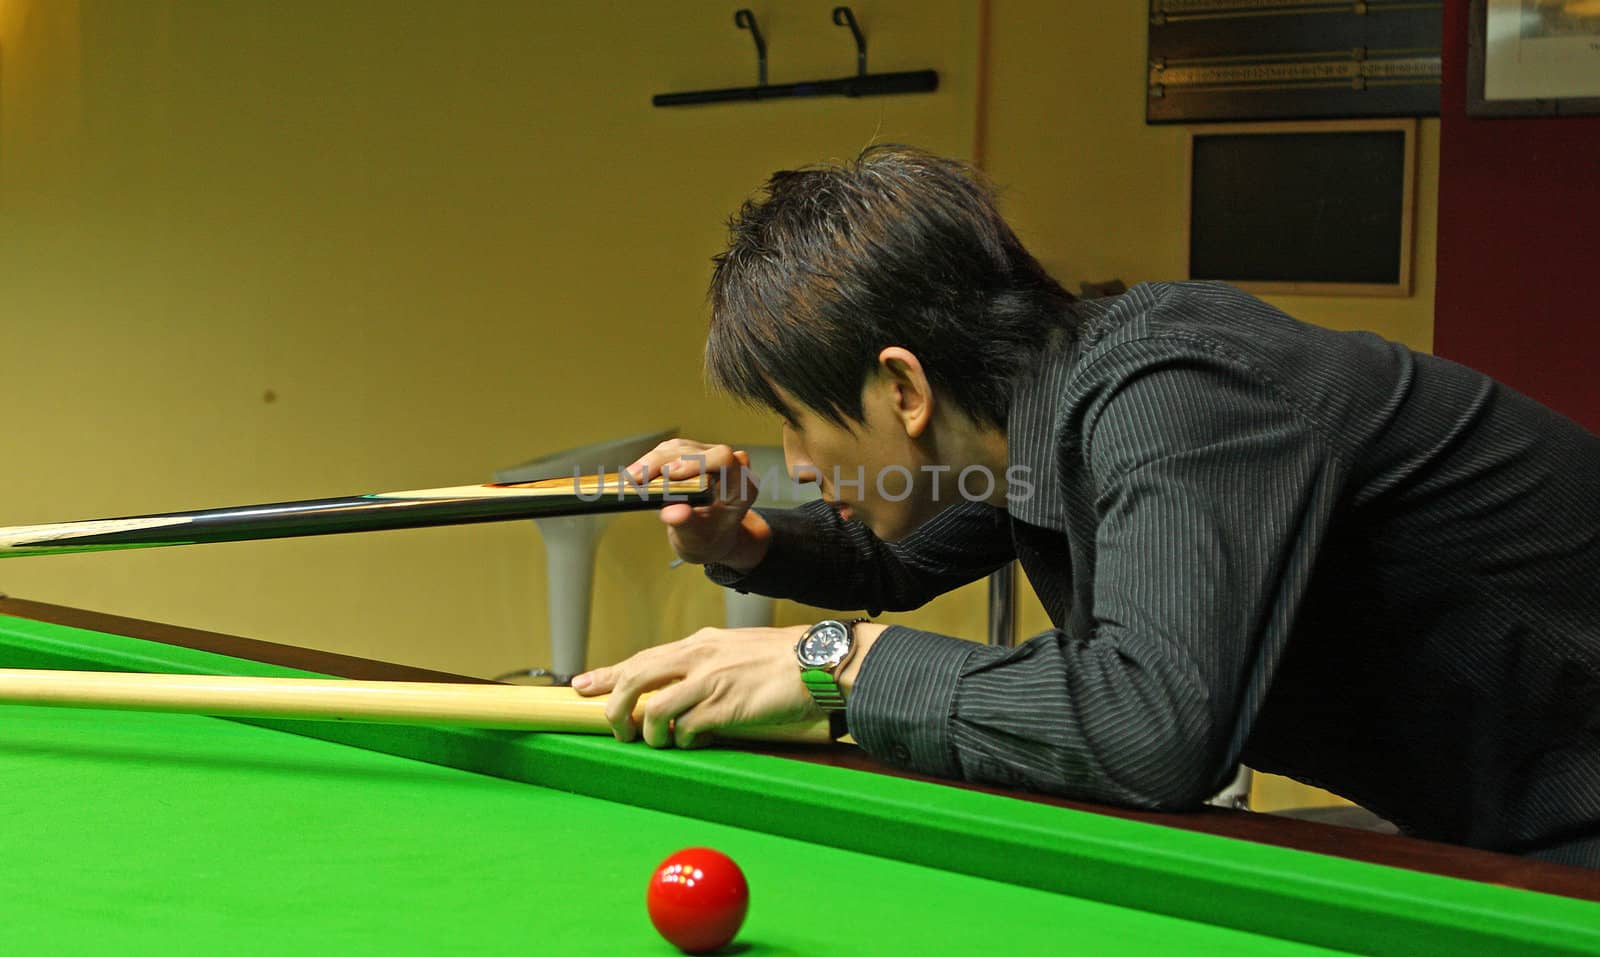 Young man concentrating while aiming at pool ball while playing billiards. 